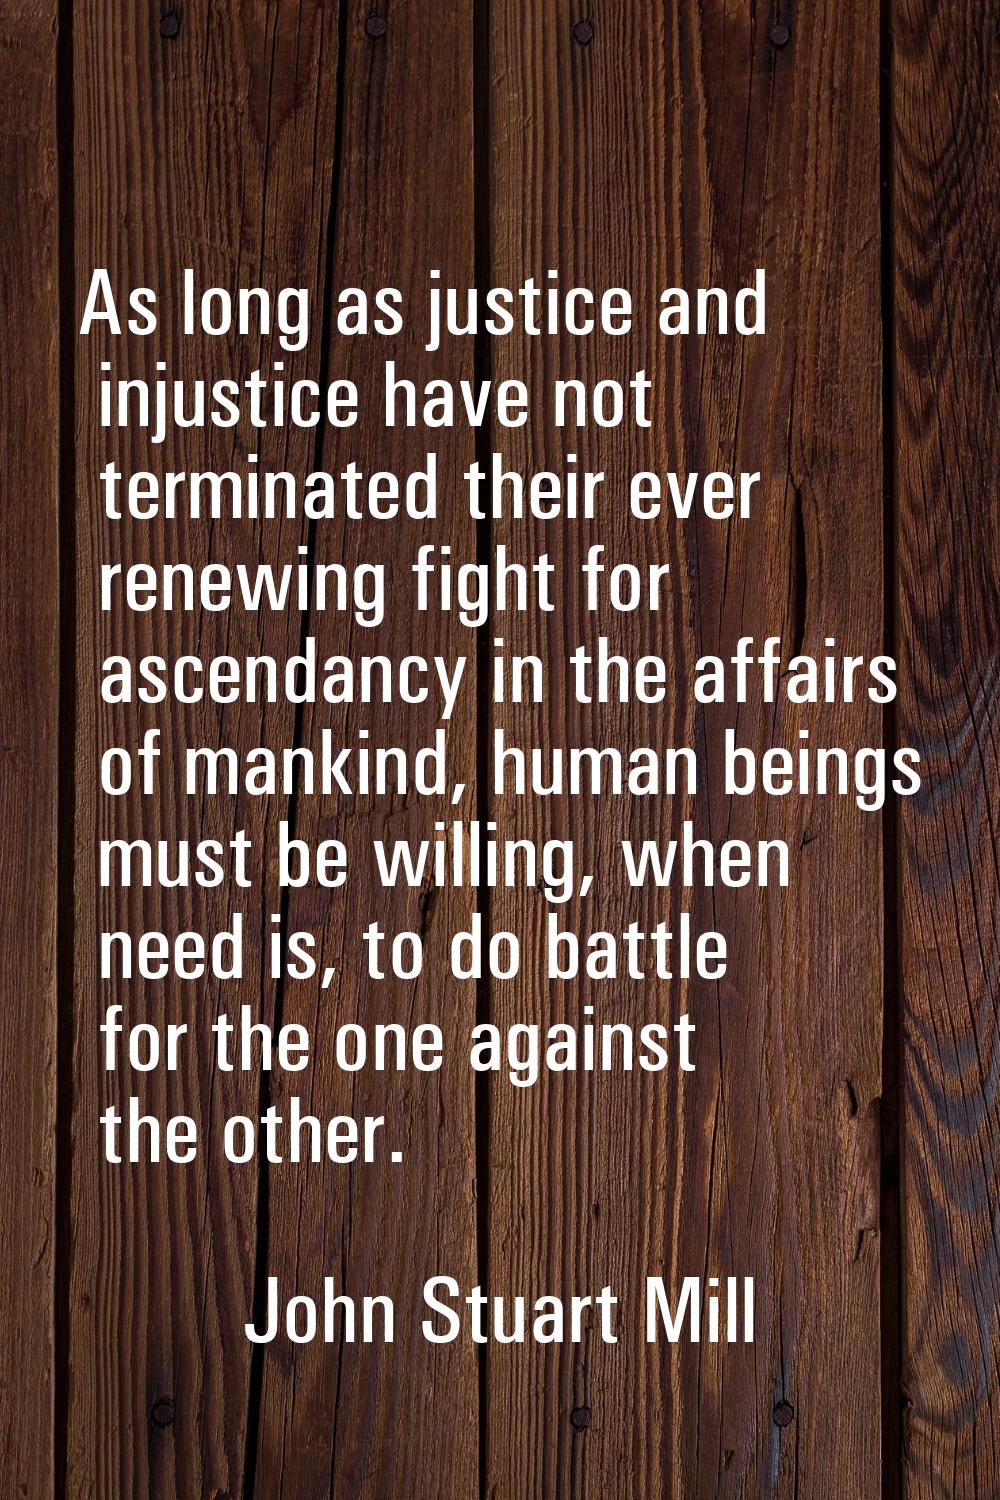 As long as justice and injustice have not terminated their ever renewing fight for ascendancy in th